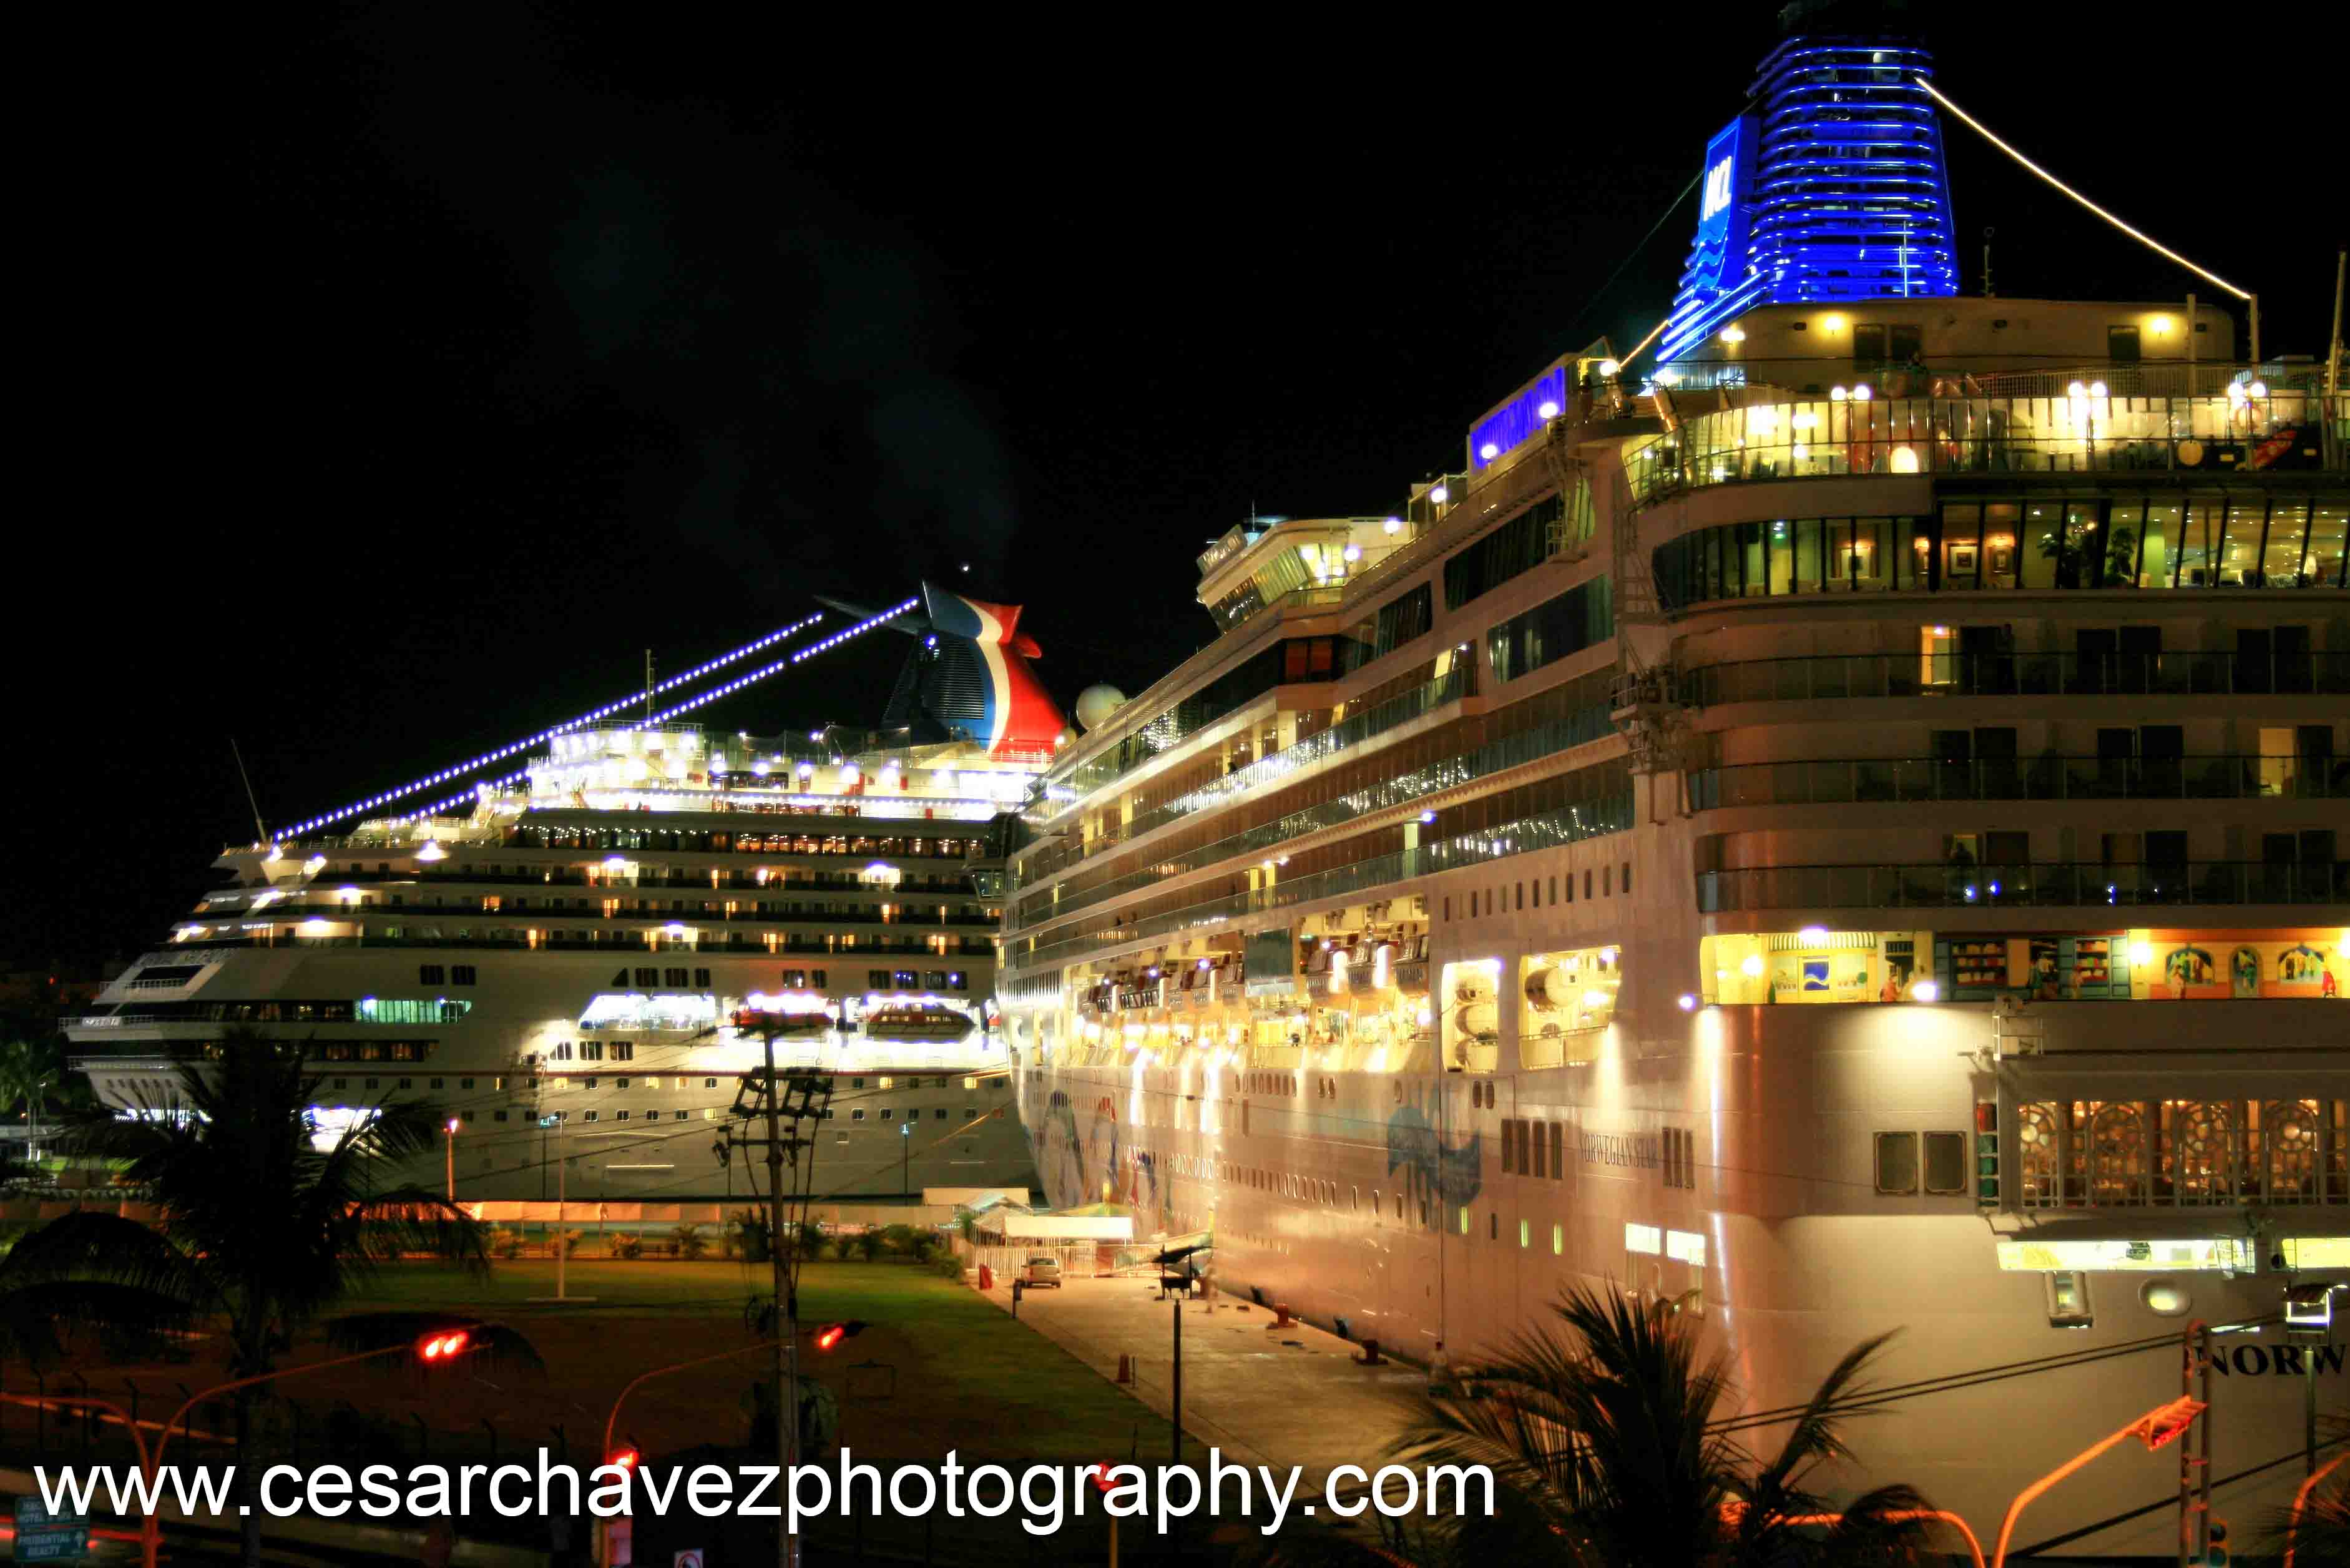 The Norwegian Star & Carnival cruise ship view from the MALL